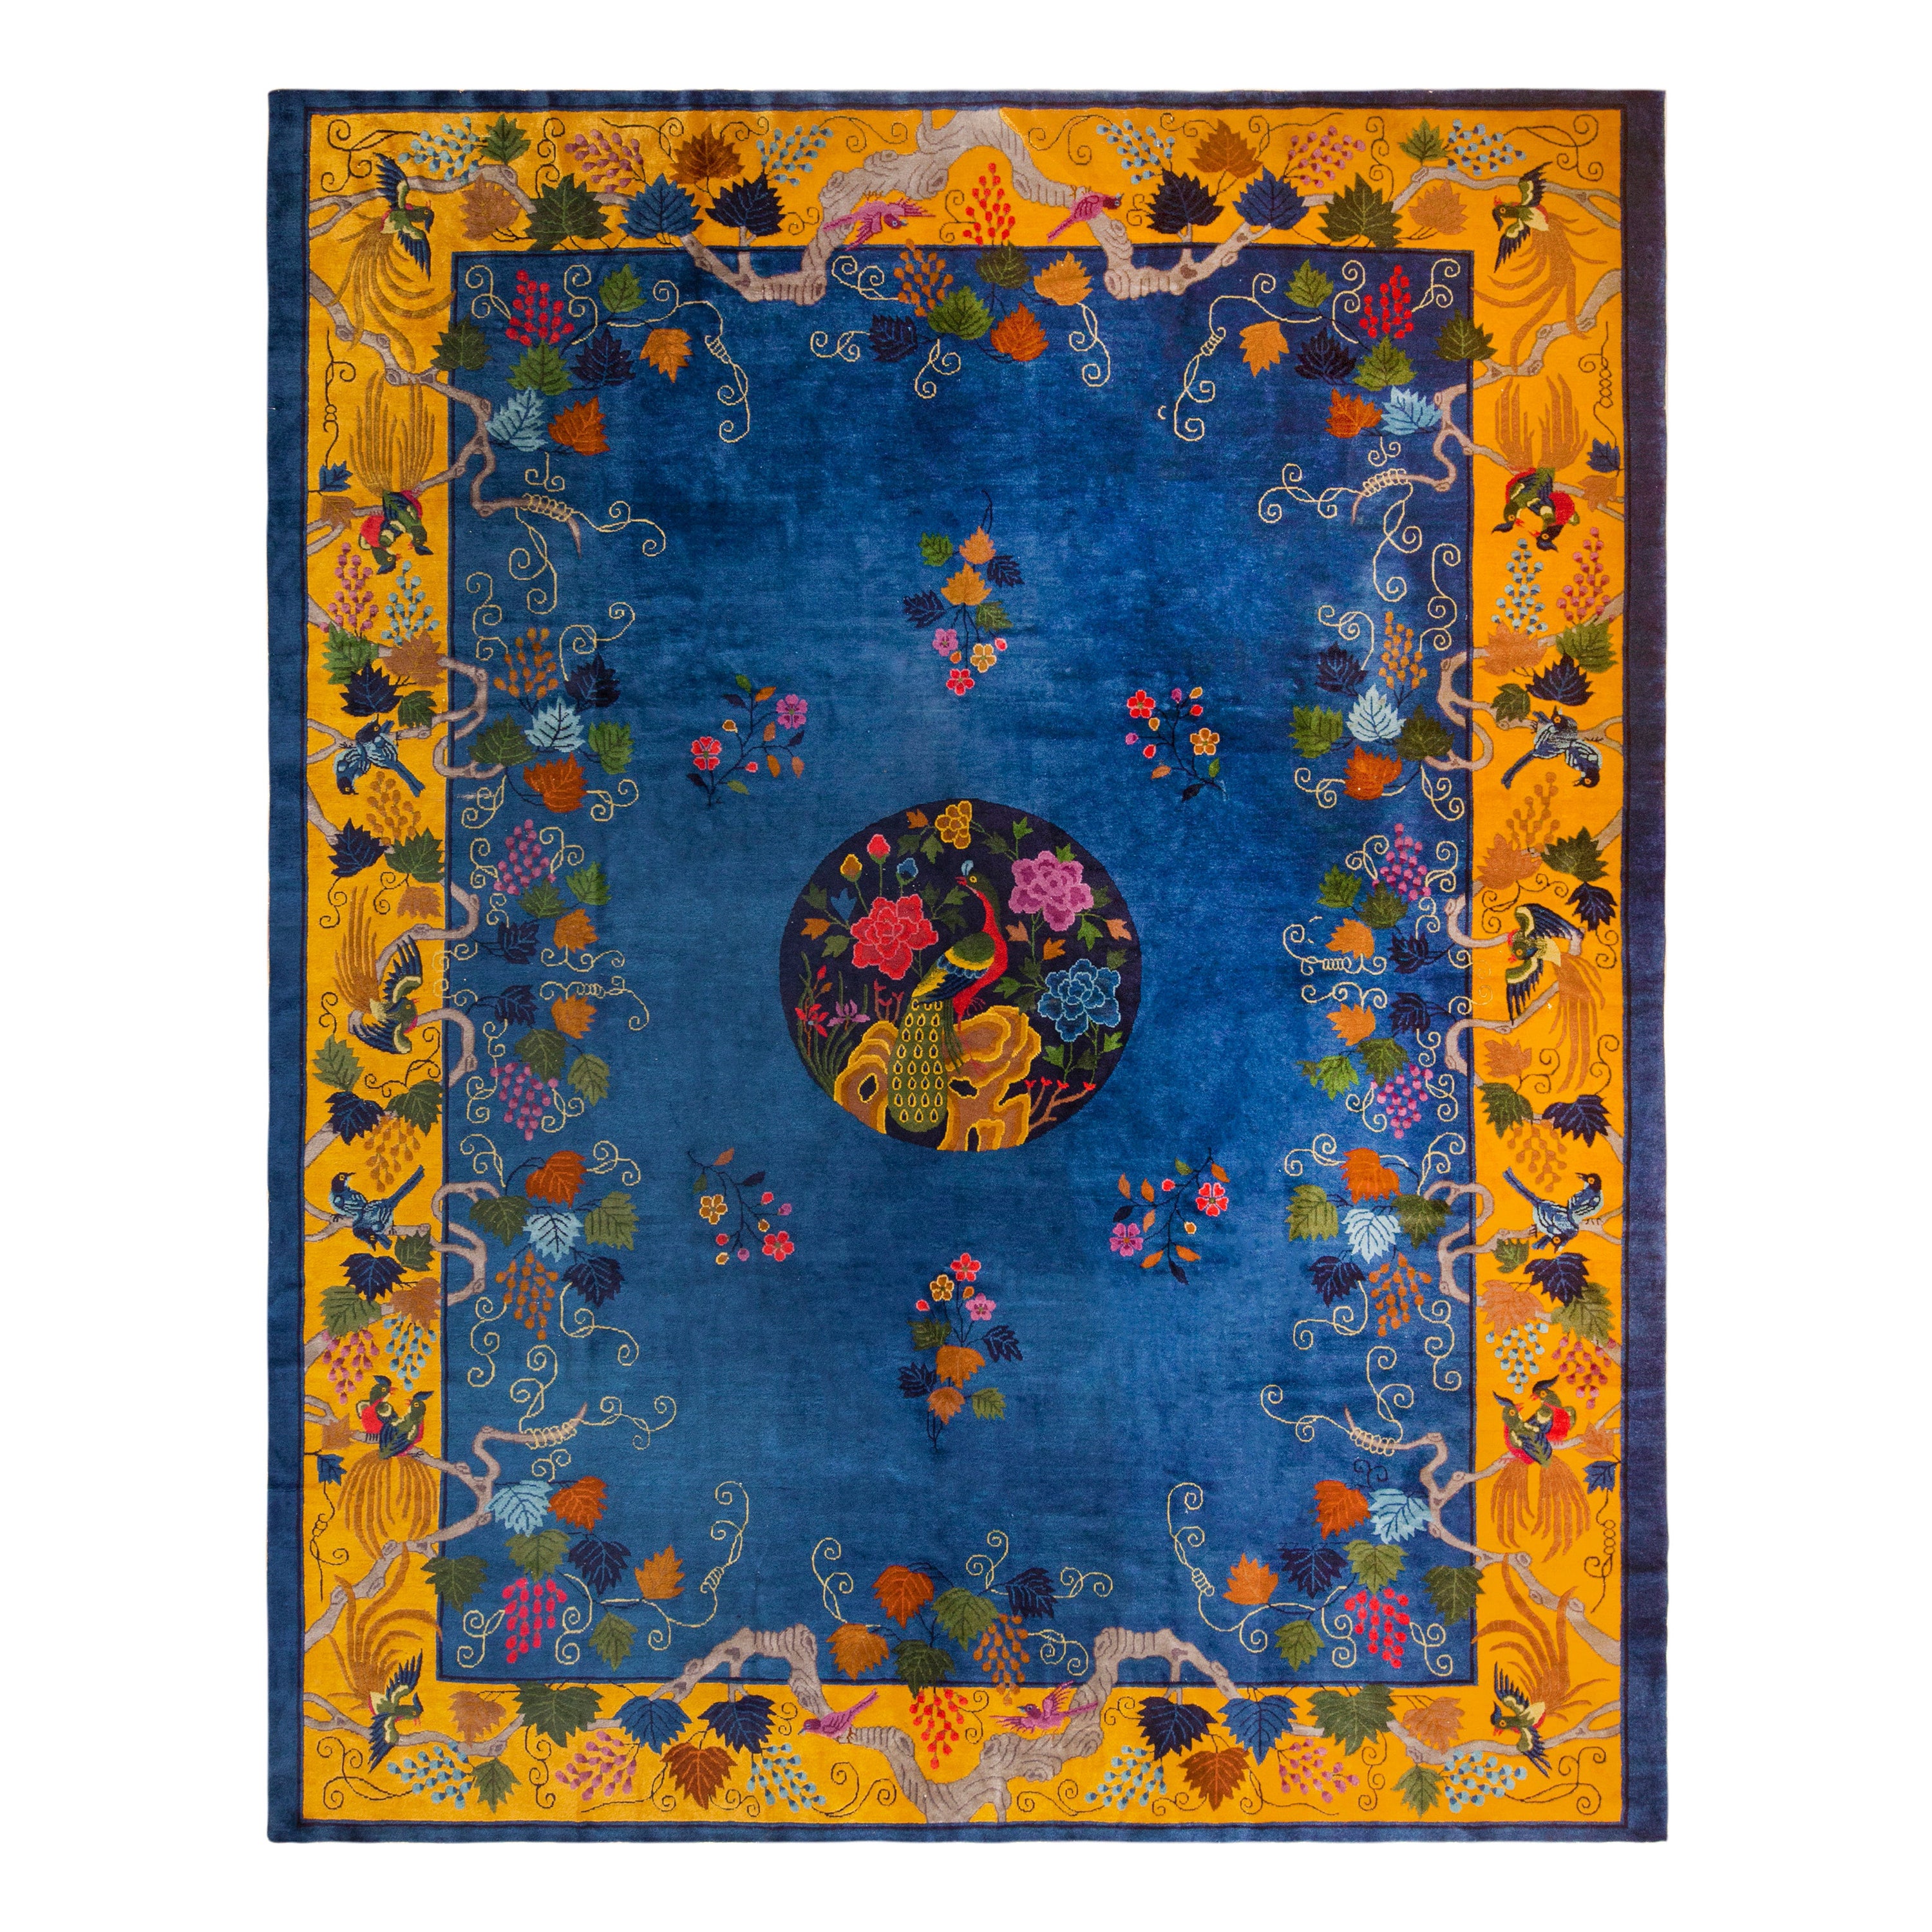 Eclectic Colorful Antique Chinese Art Deco Peacock Rug 10' x 12'1" For Sale